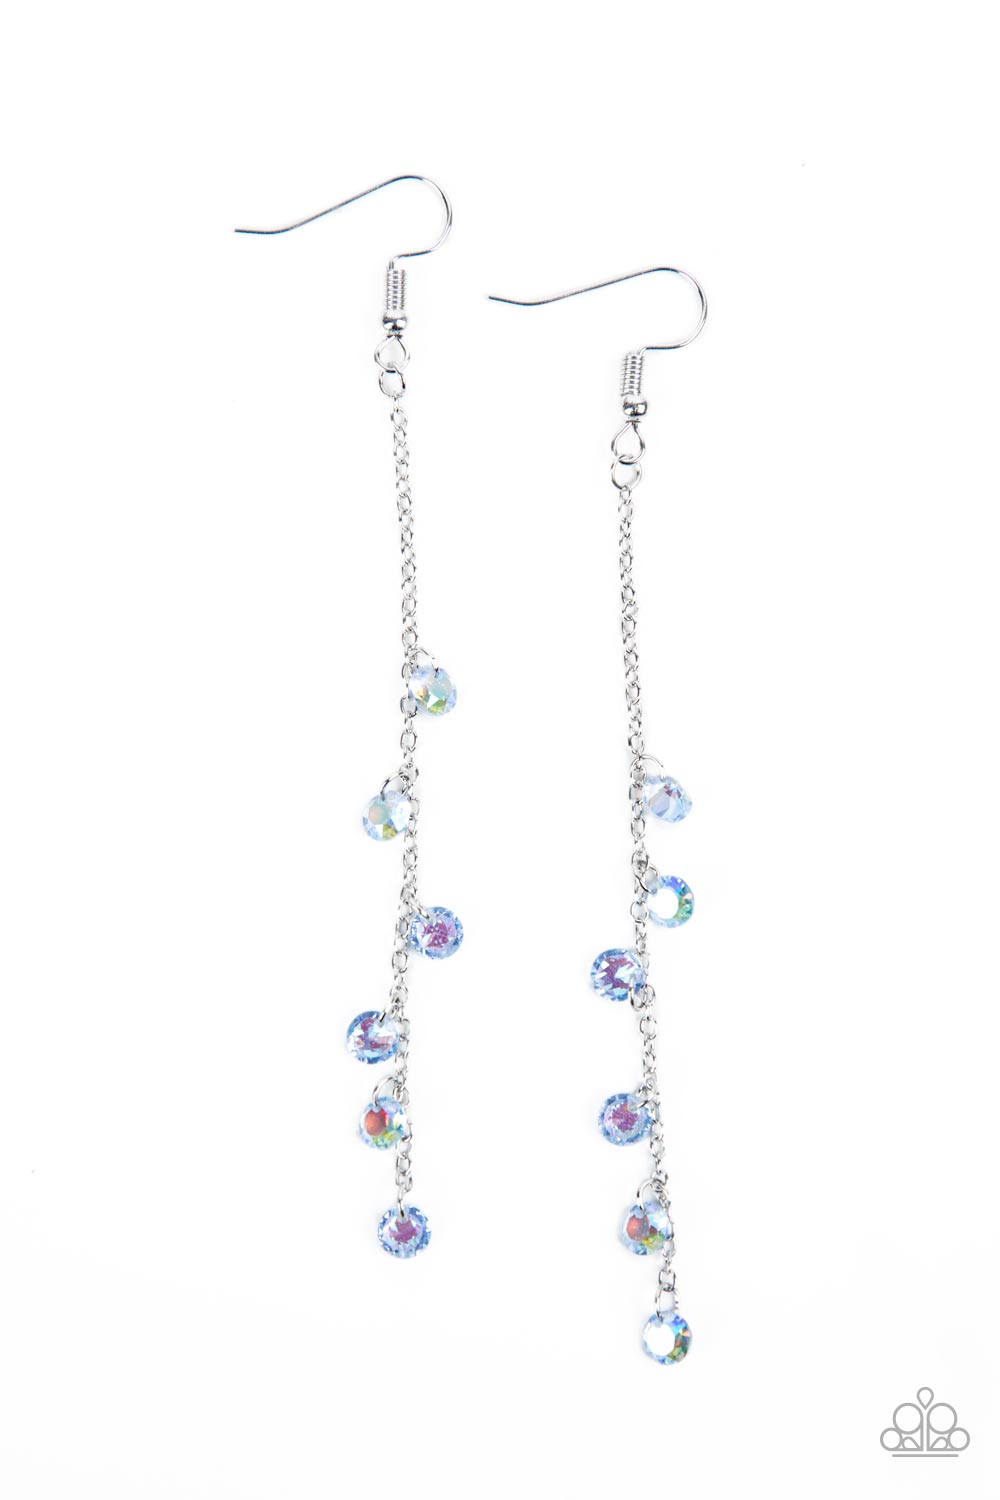 Paparazzi Extended Eloquence - Blue Earrings - A Finishing Touch Jewelry